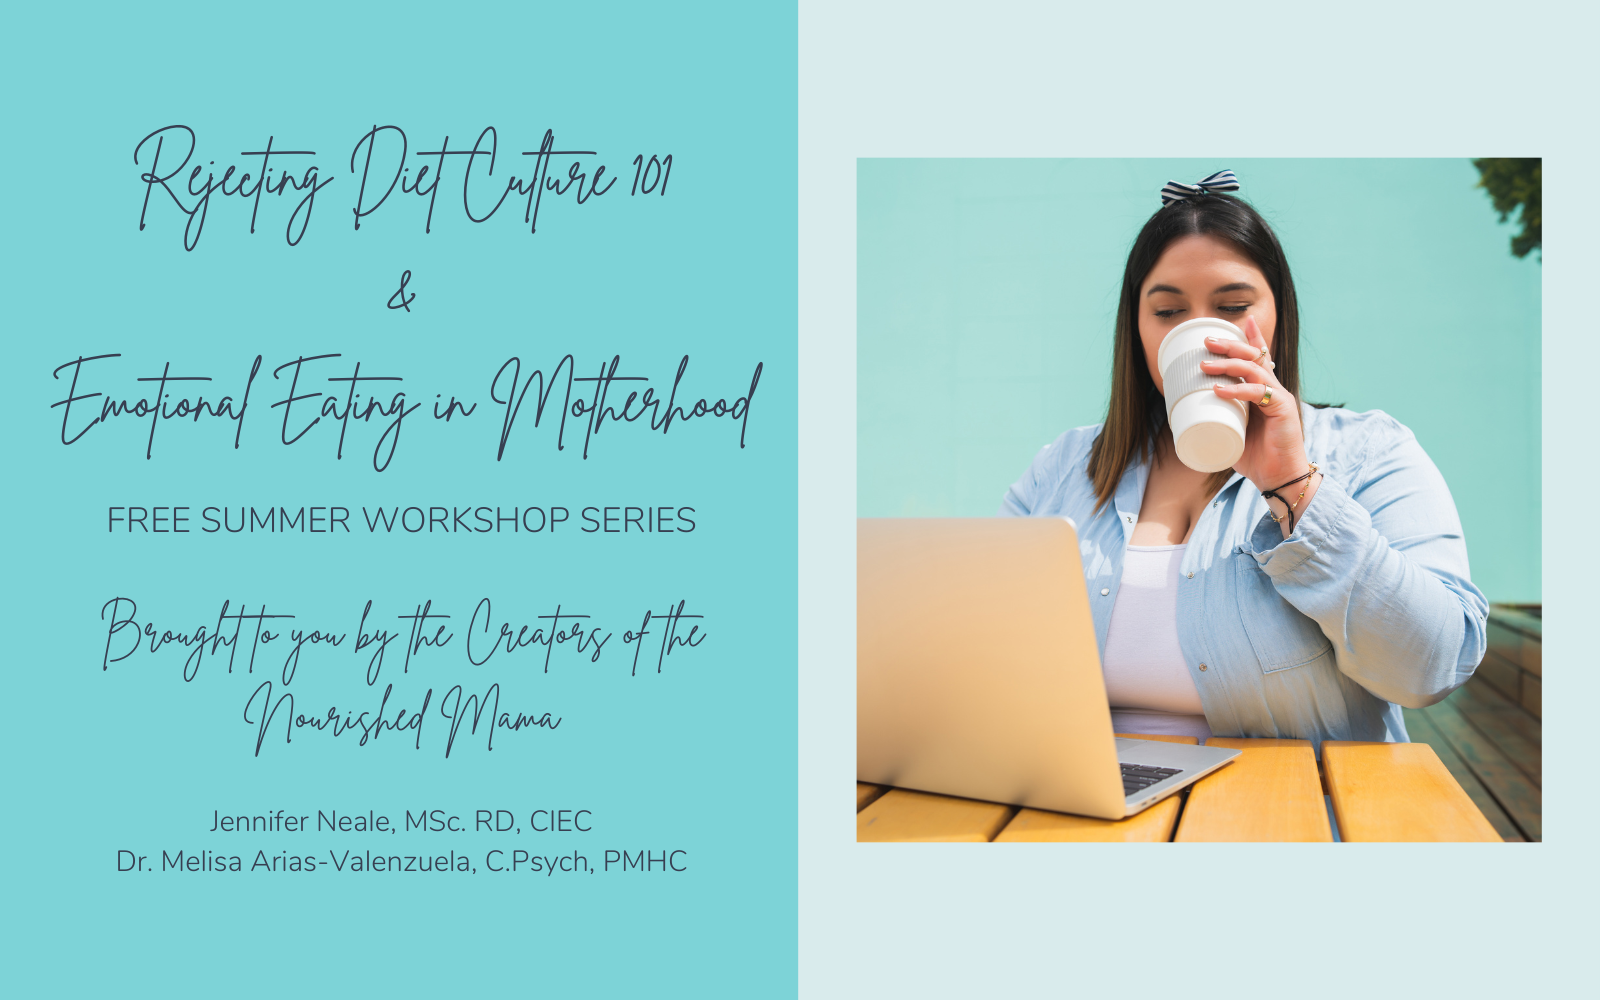 FREE workshop with Registered Dietitian and Certified Intuitive Eating Counsellor Jennifer Neale and Clinical Psychologist Dr. Melisa Arias-Valenzuela on Rejecting Diet Culture and Emotional Eating